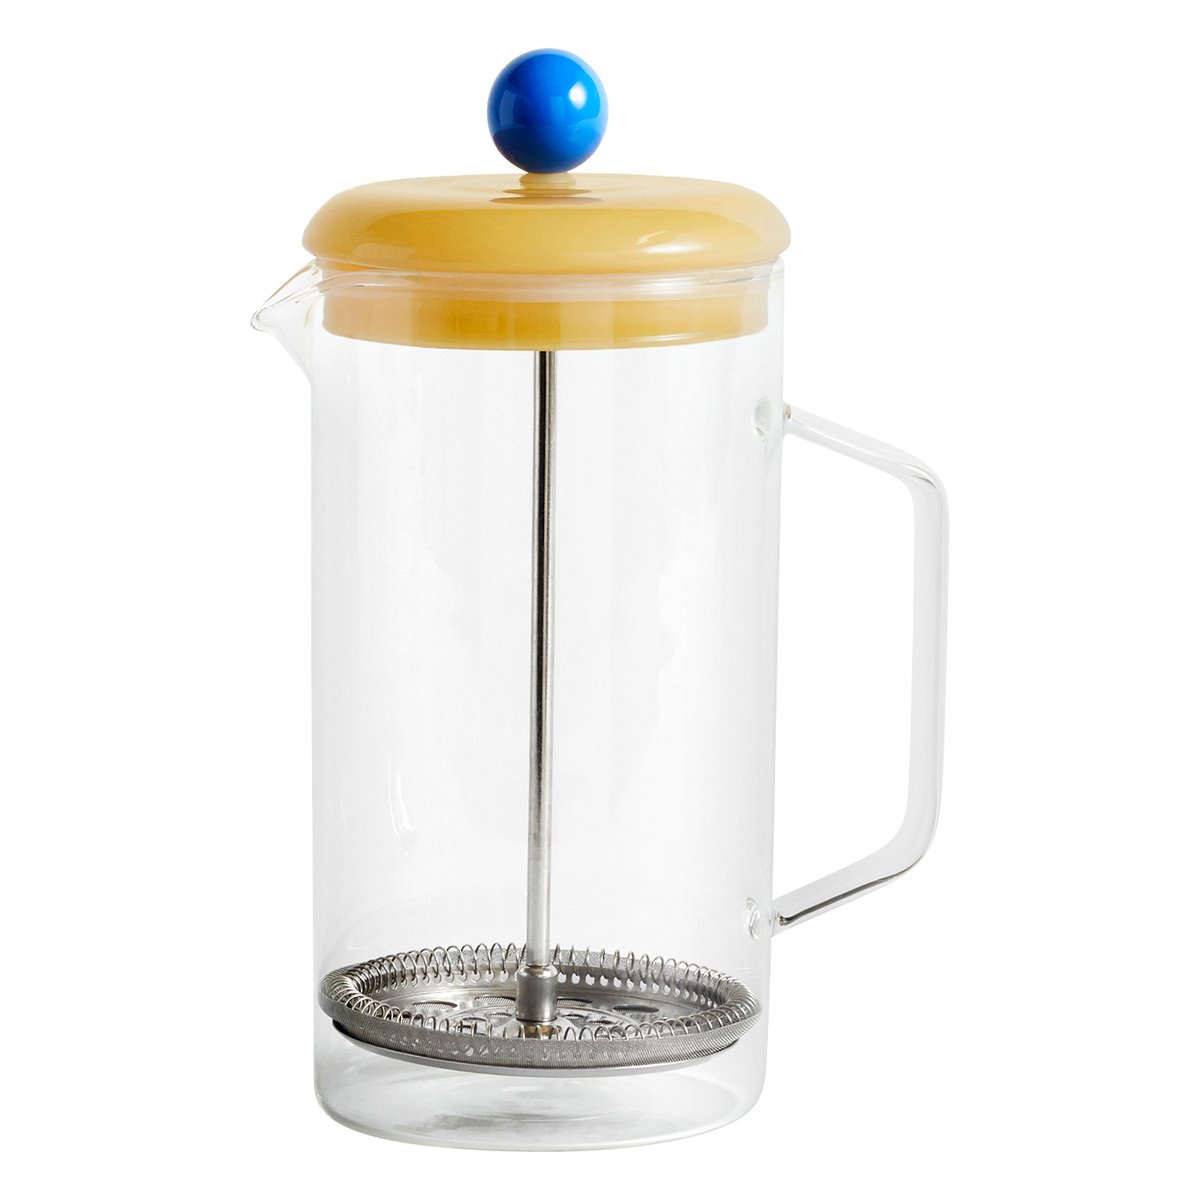 https://media.fds.fi/product_image/541356_French_Press_Brewer_clear.jpg